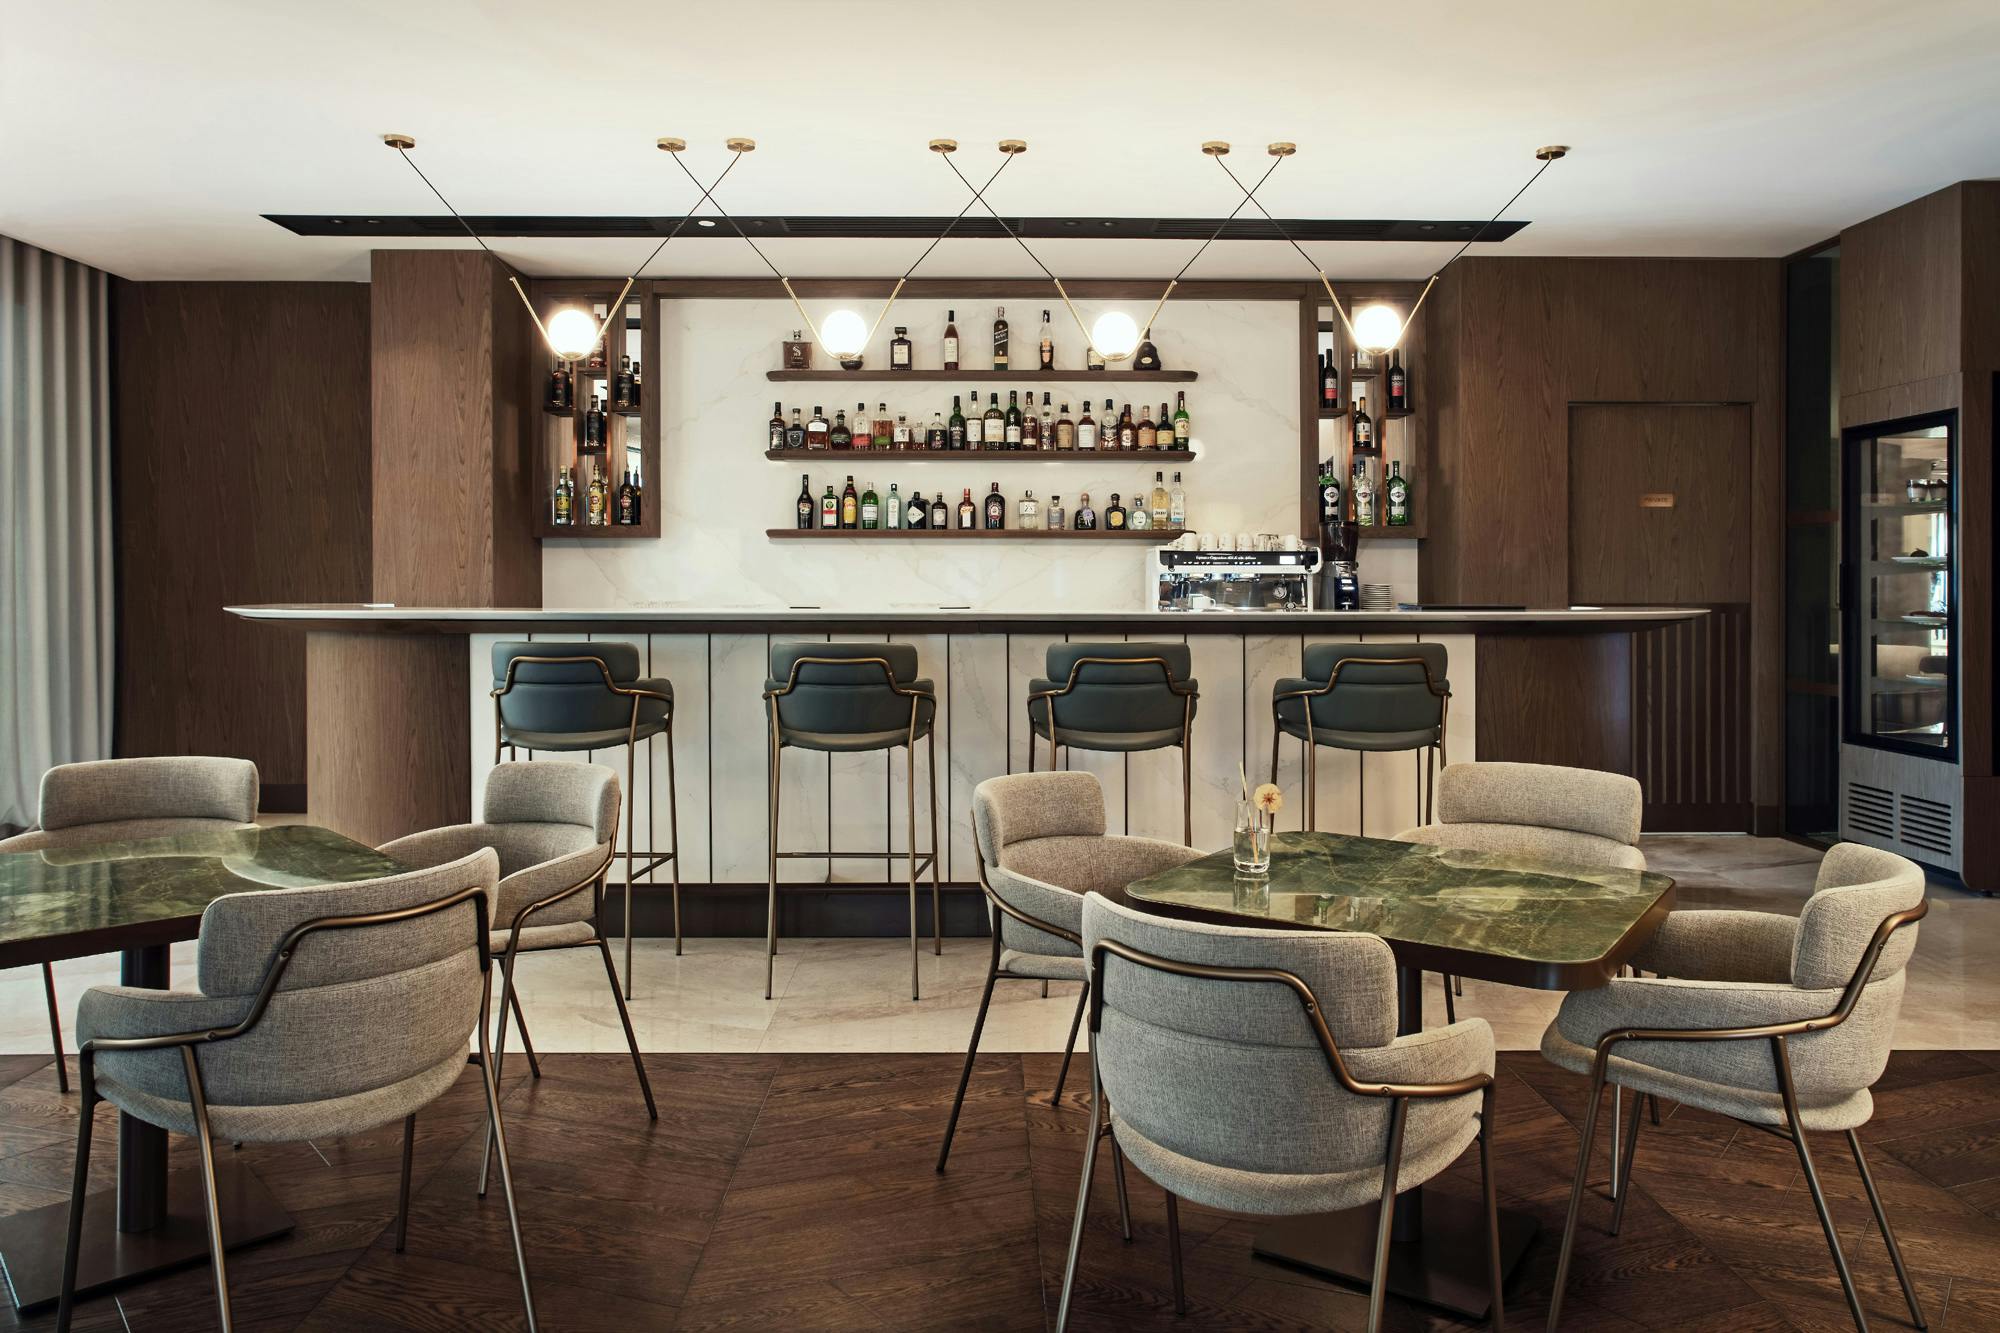 Numéro d'image 47 de la section actuelle de A century old building gets a new lease of life as one of Oslo’s most vibrant hotels thanks to Silestone de Cosentino France